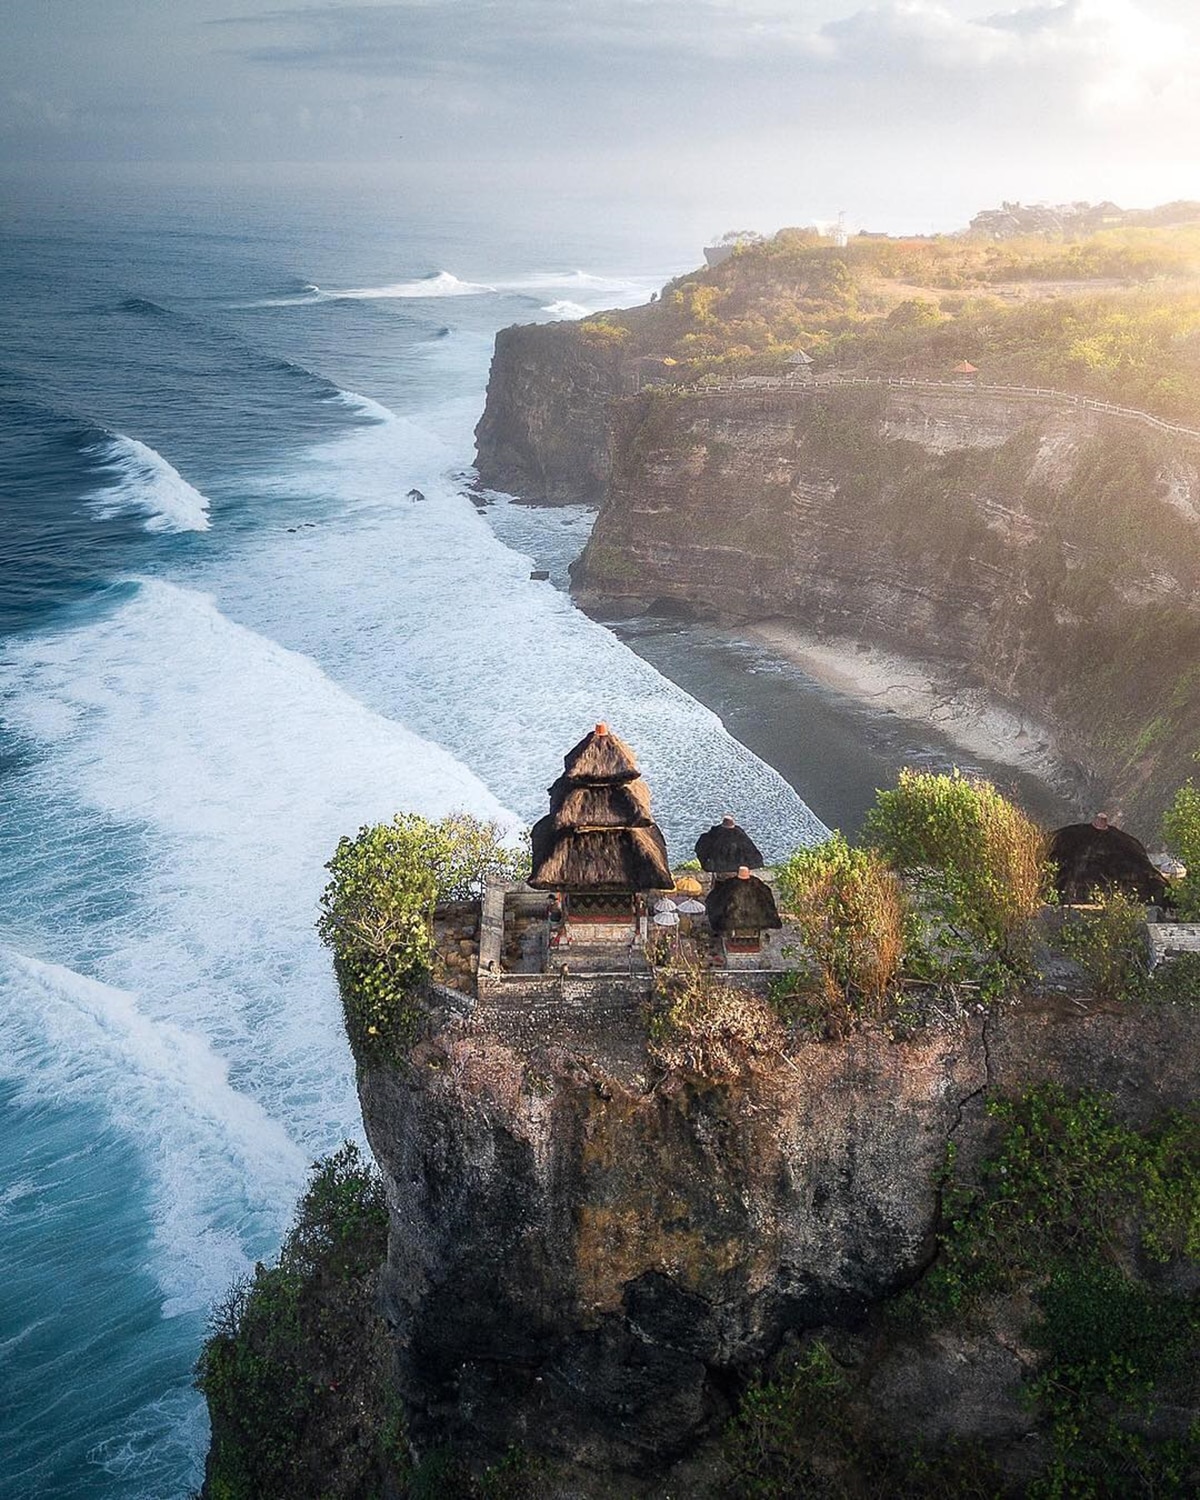 15 Instagrammable Destinations You Must Visit in Bali